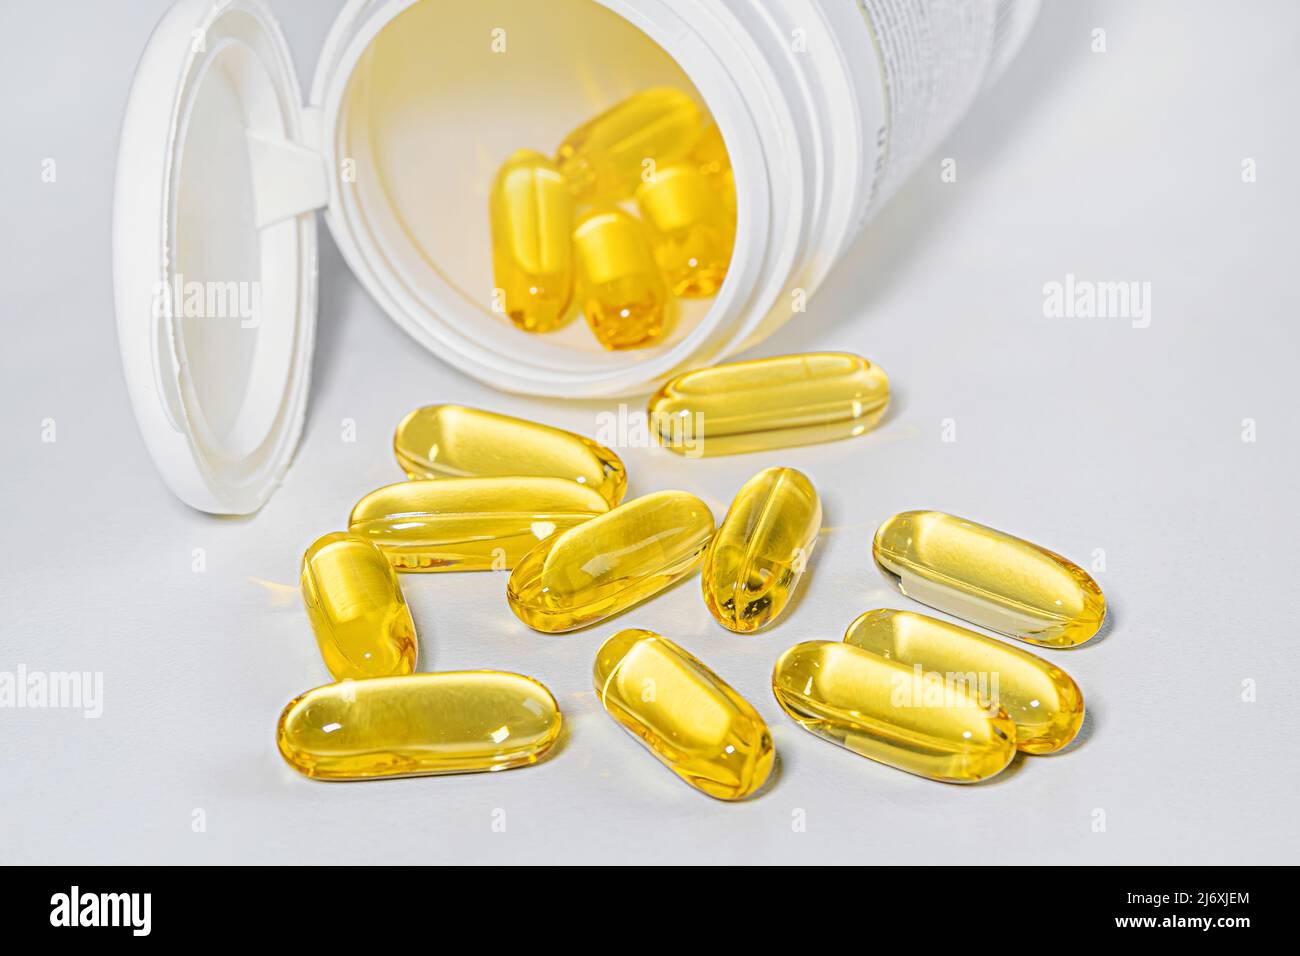 The concept of healthy nutrition, diet and omega-3 supplements - close-up of capsules poured out of a jar Stock Photo